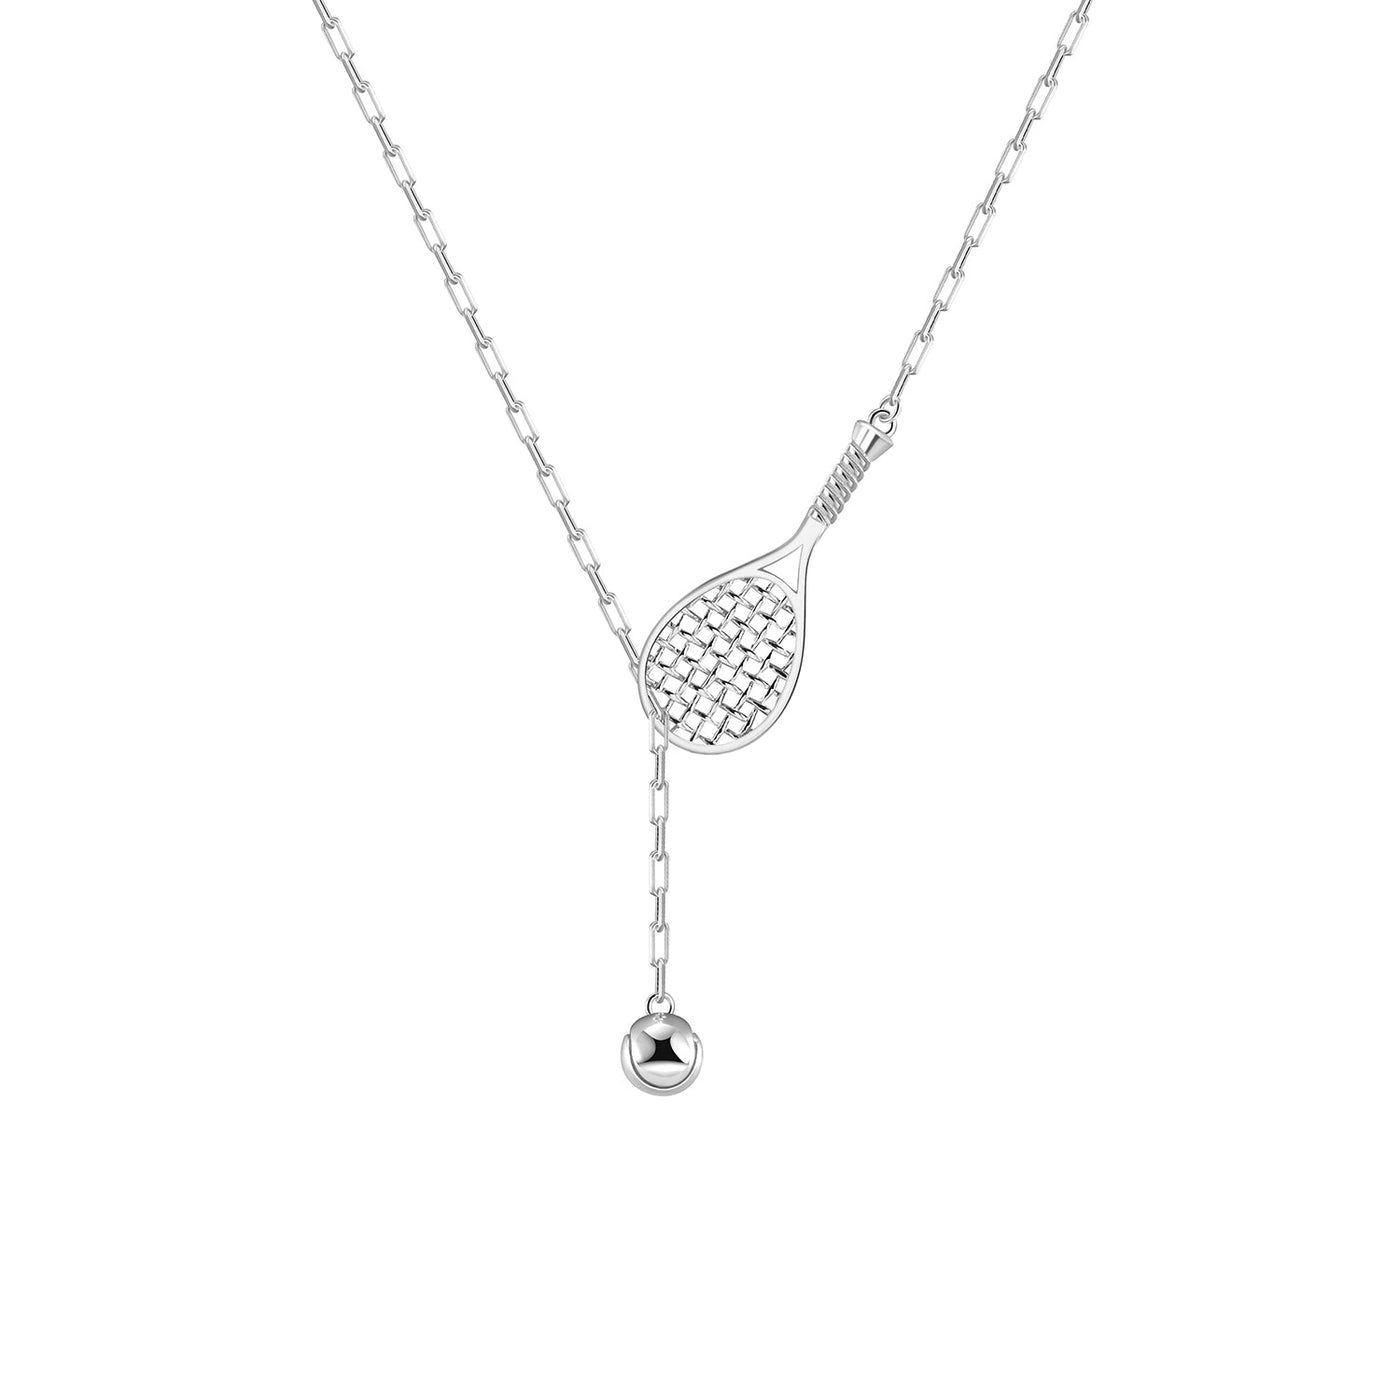 LoveMatch Tennis Lariat Racket and Ball Necklace Silver